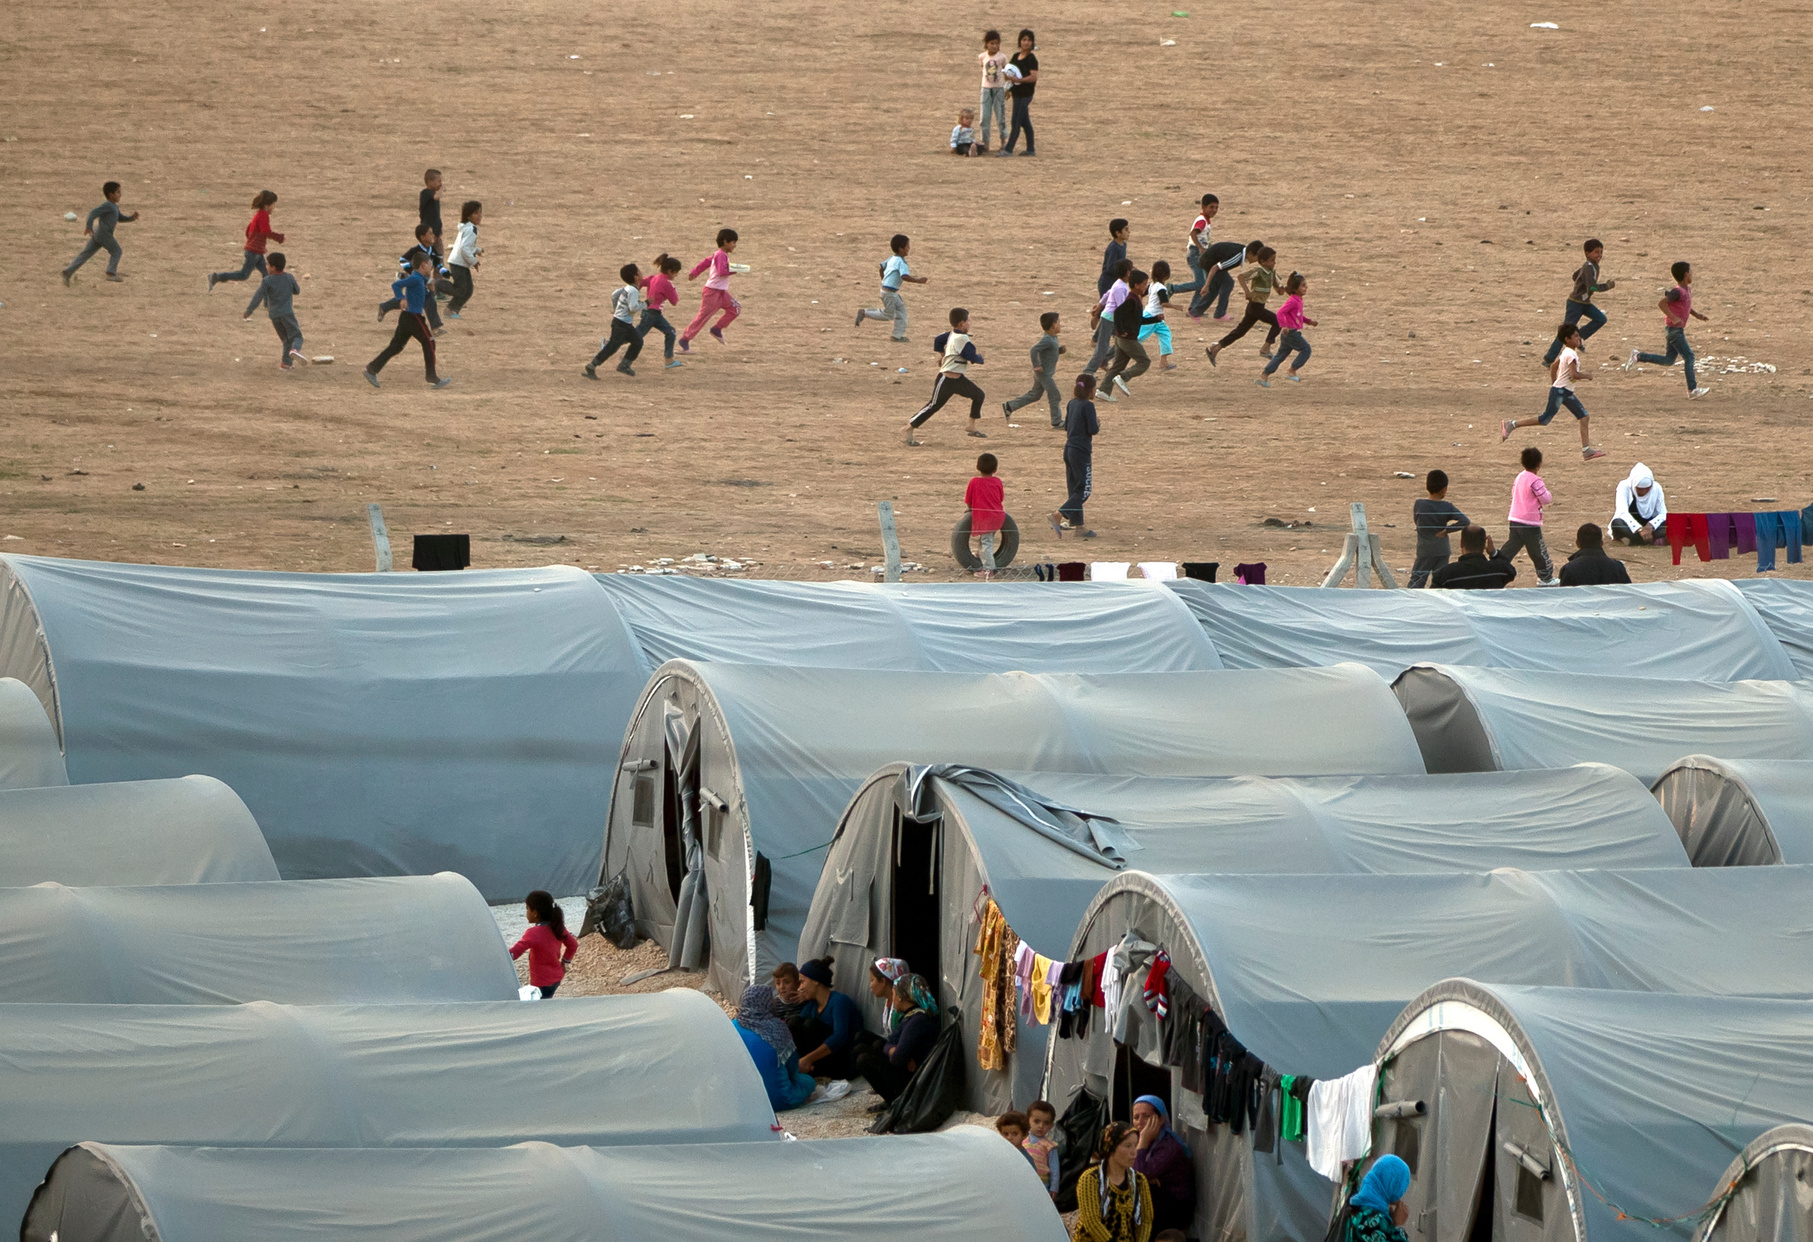 A group of people running around a refugee camp in the desert in Turkey.